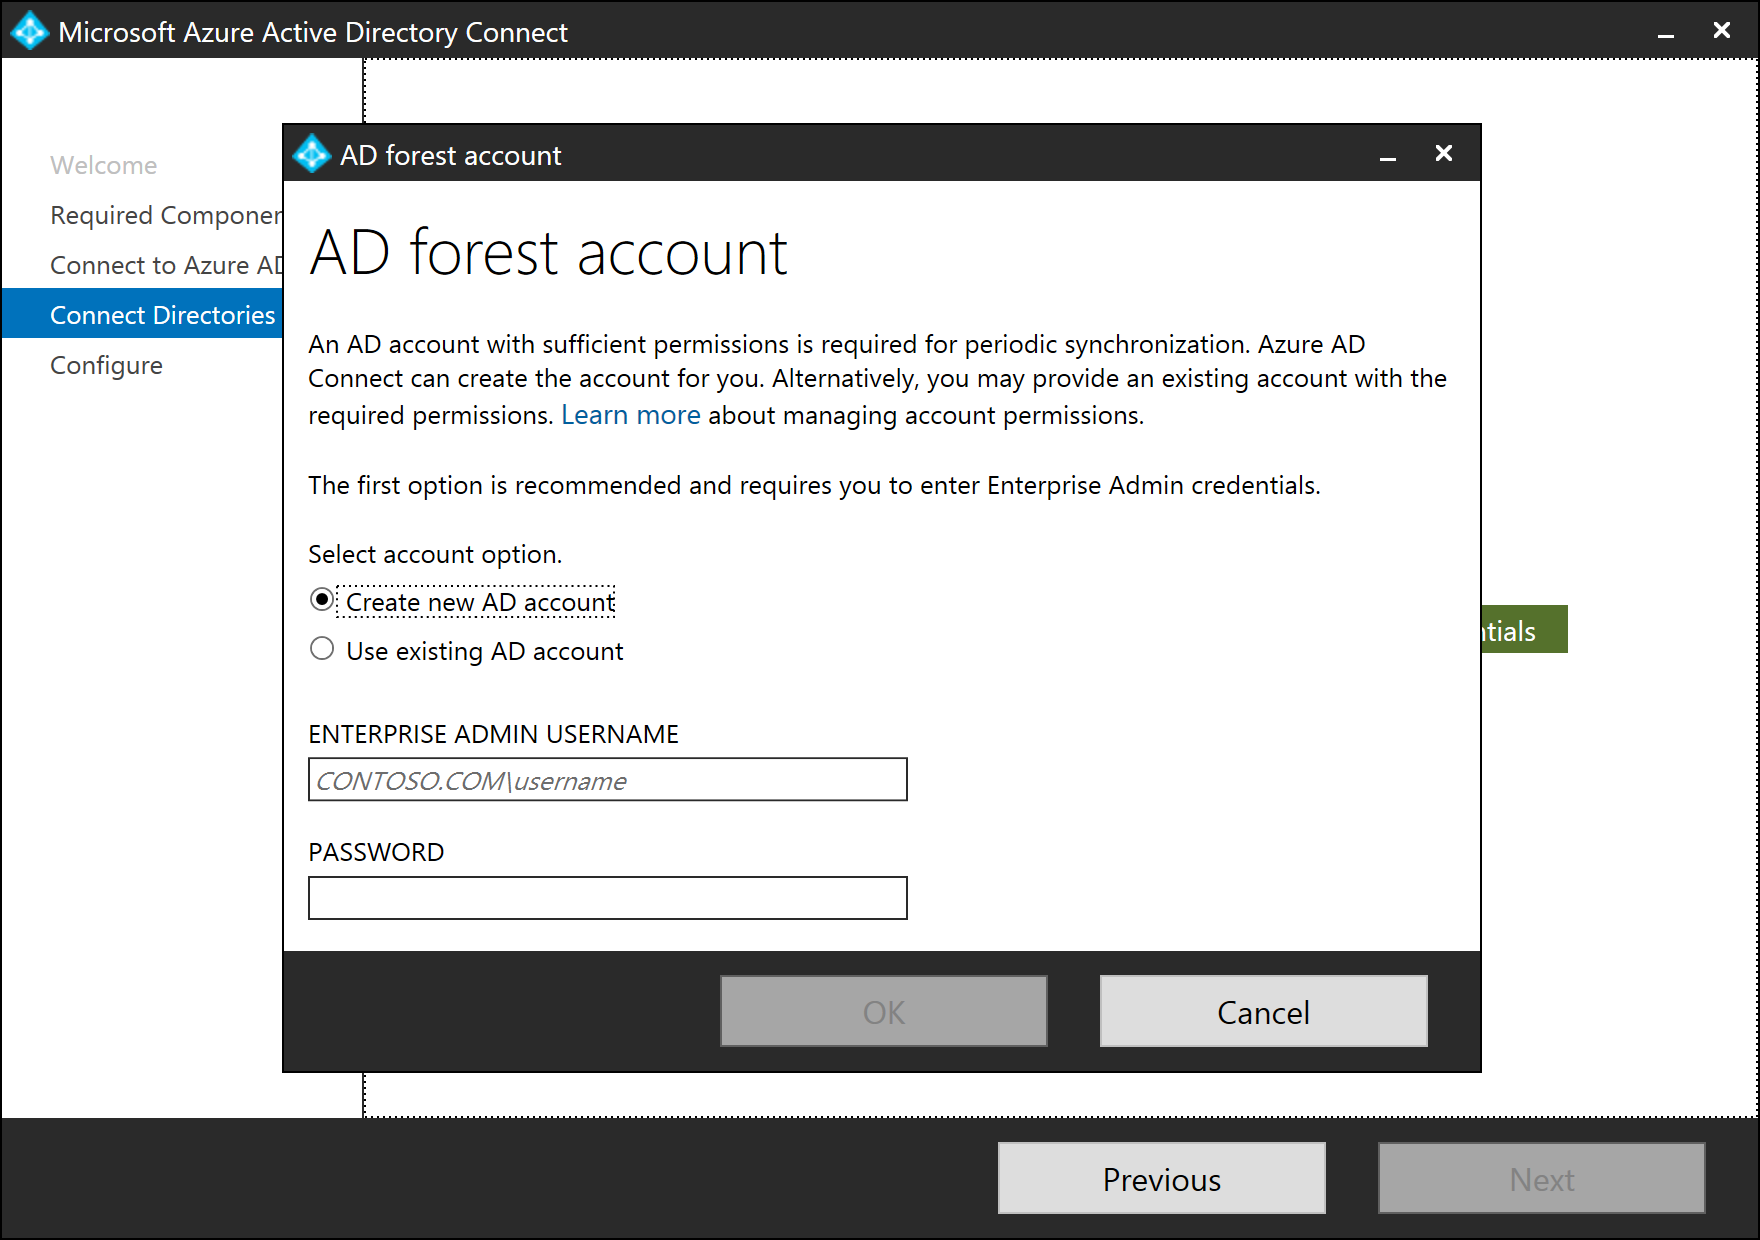 Screenshot that shows the pop-up dialog "A D forest account" with "Create new A D account" selected.